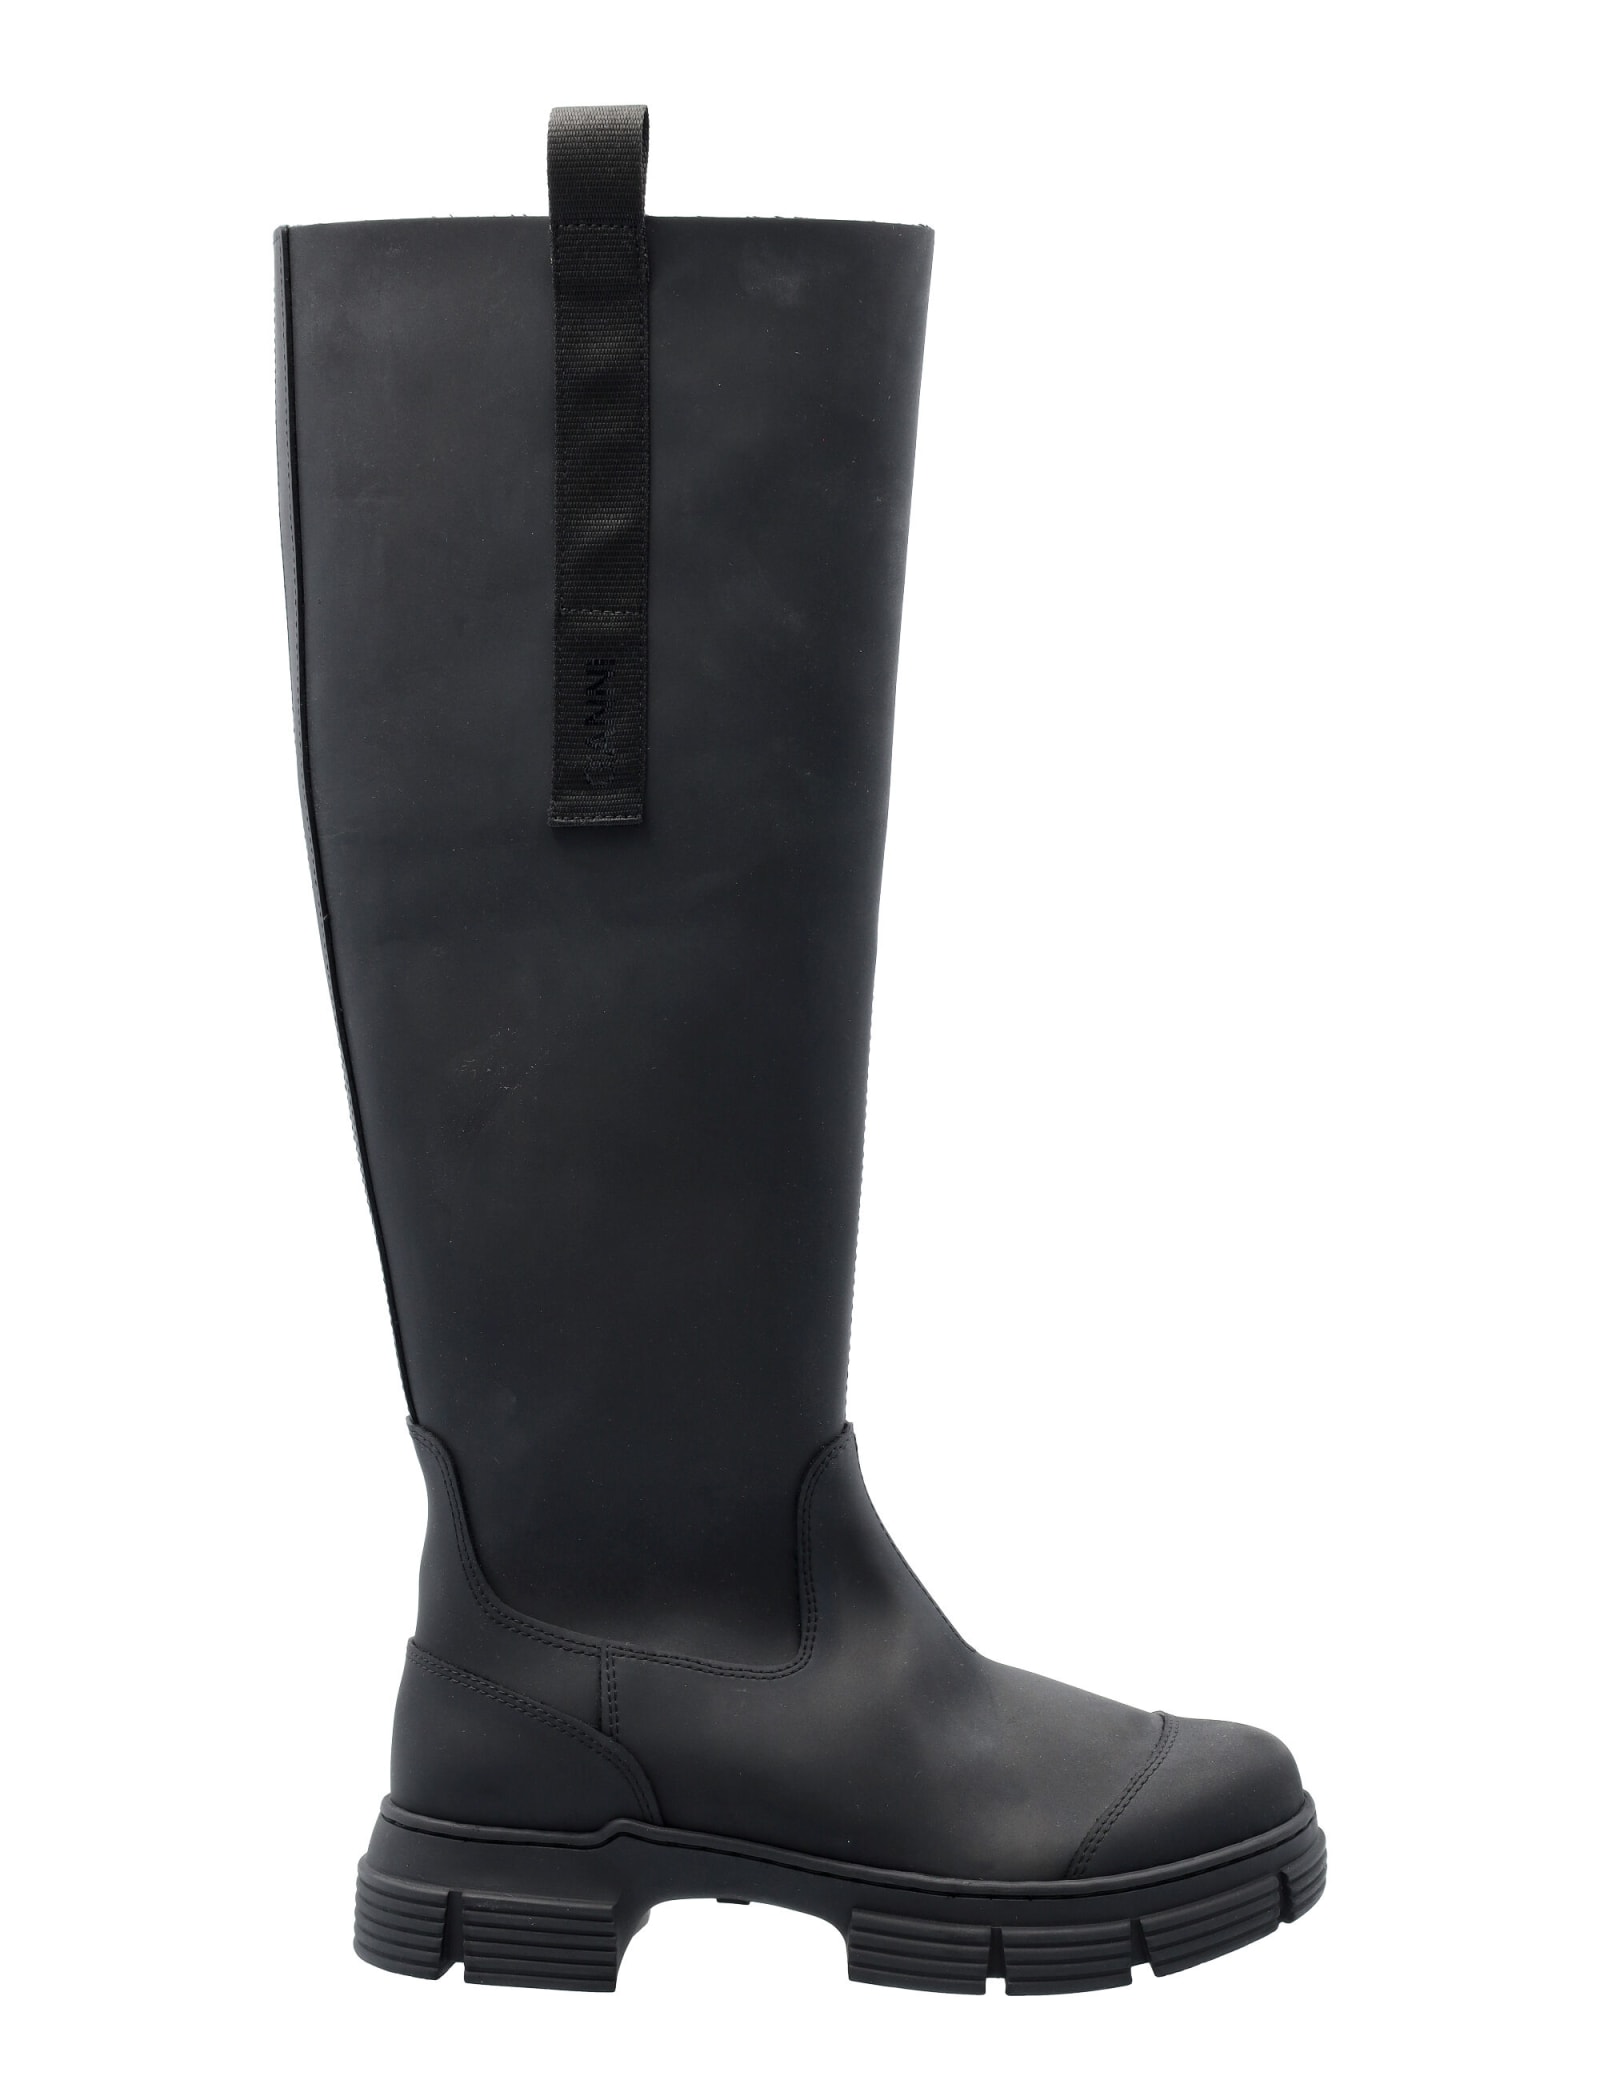 Ganni Recycled Rubber Country Boot